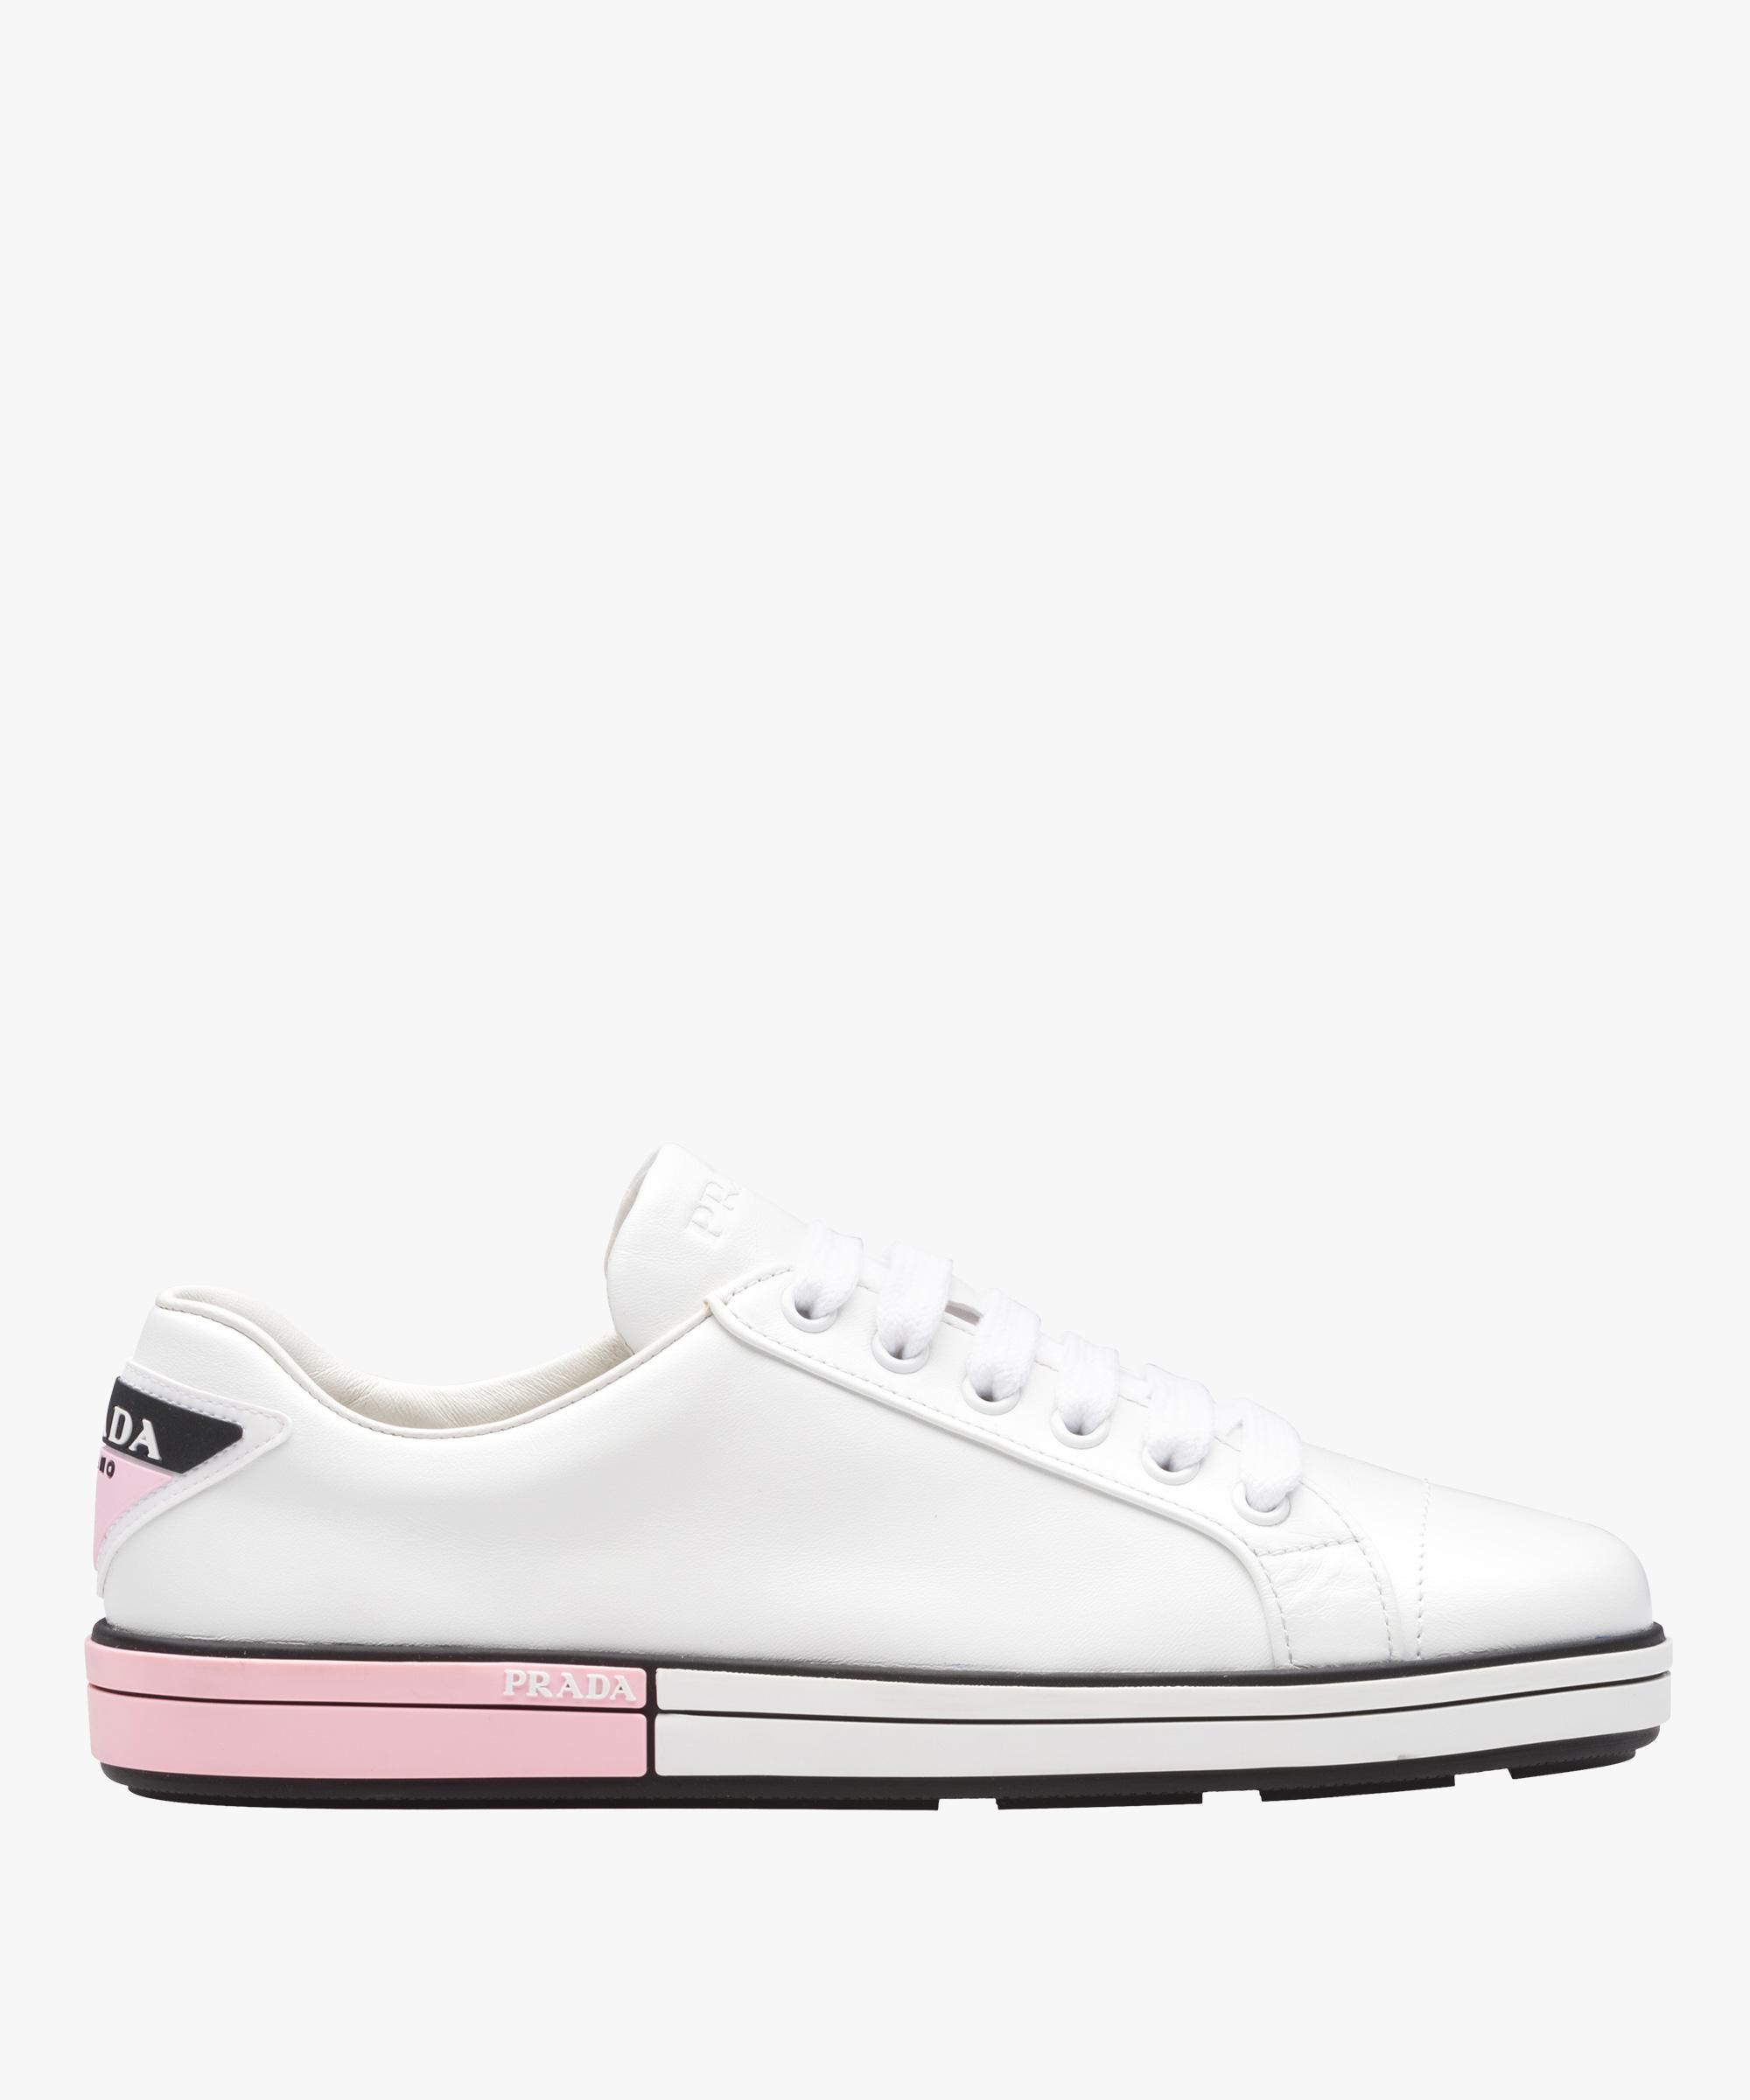 Prada Calf Leather Sneakers in White+Pink (White) | Lyst